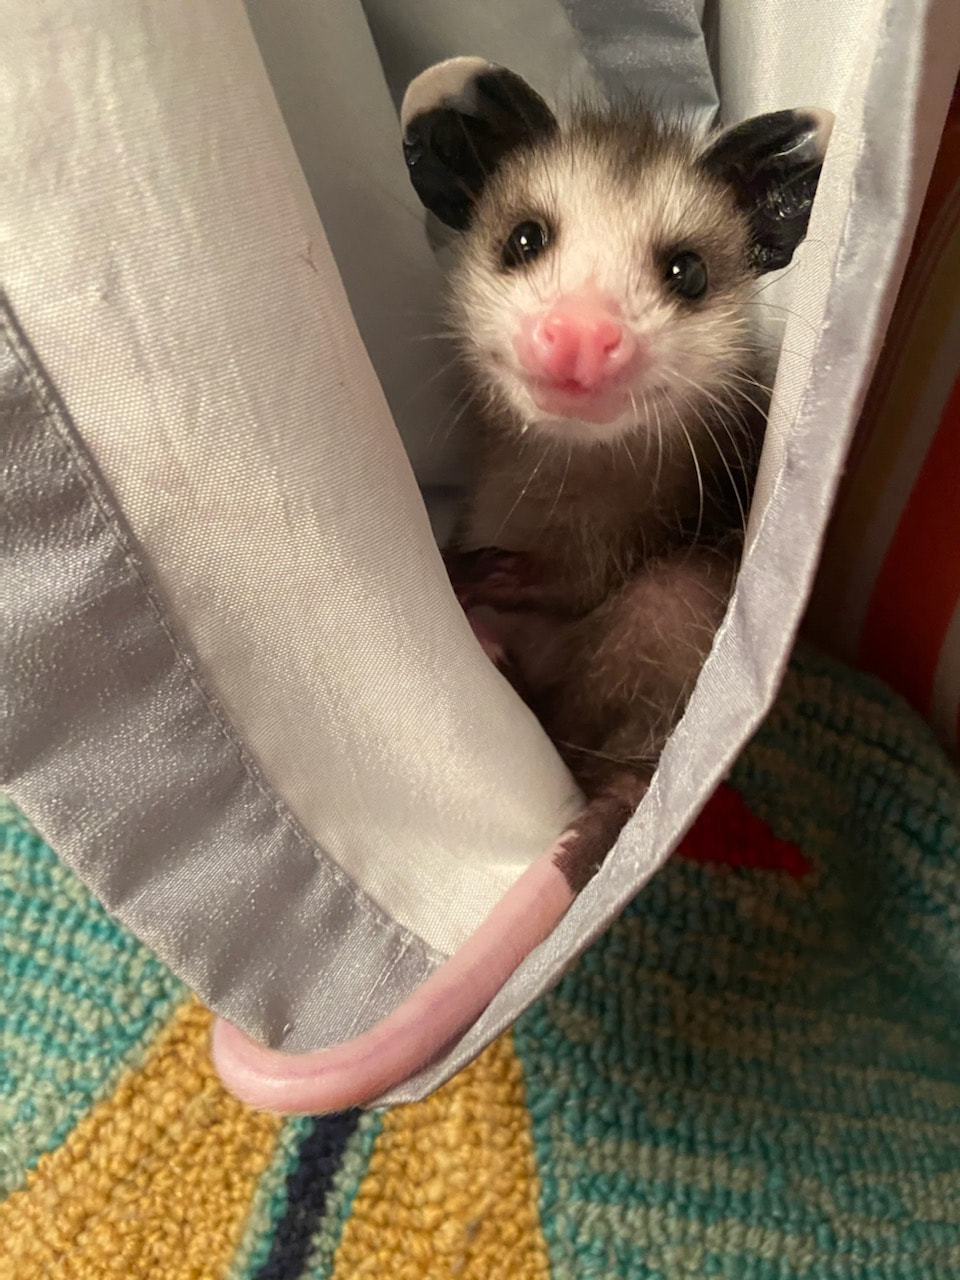 Pockets, the adorable tiny opossum, curled up in cuteness.